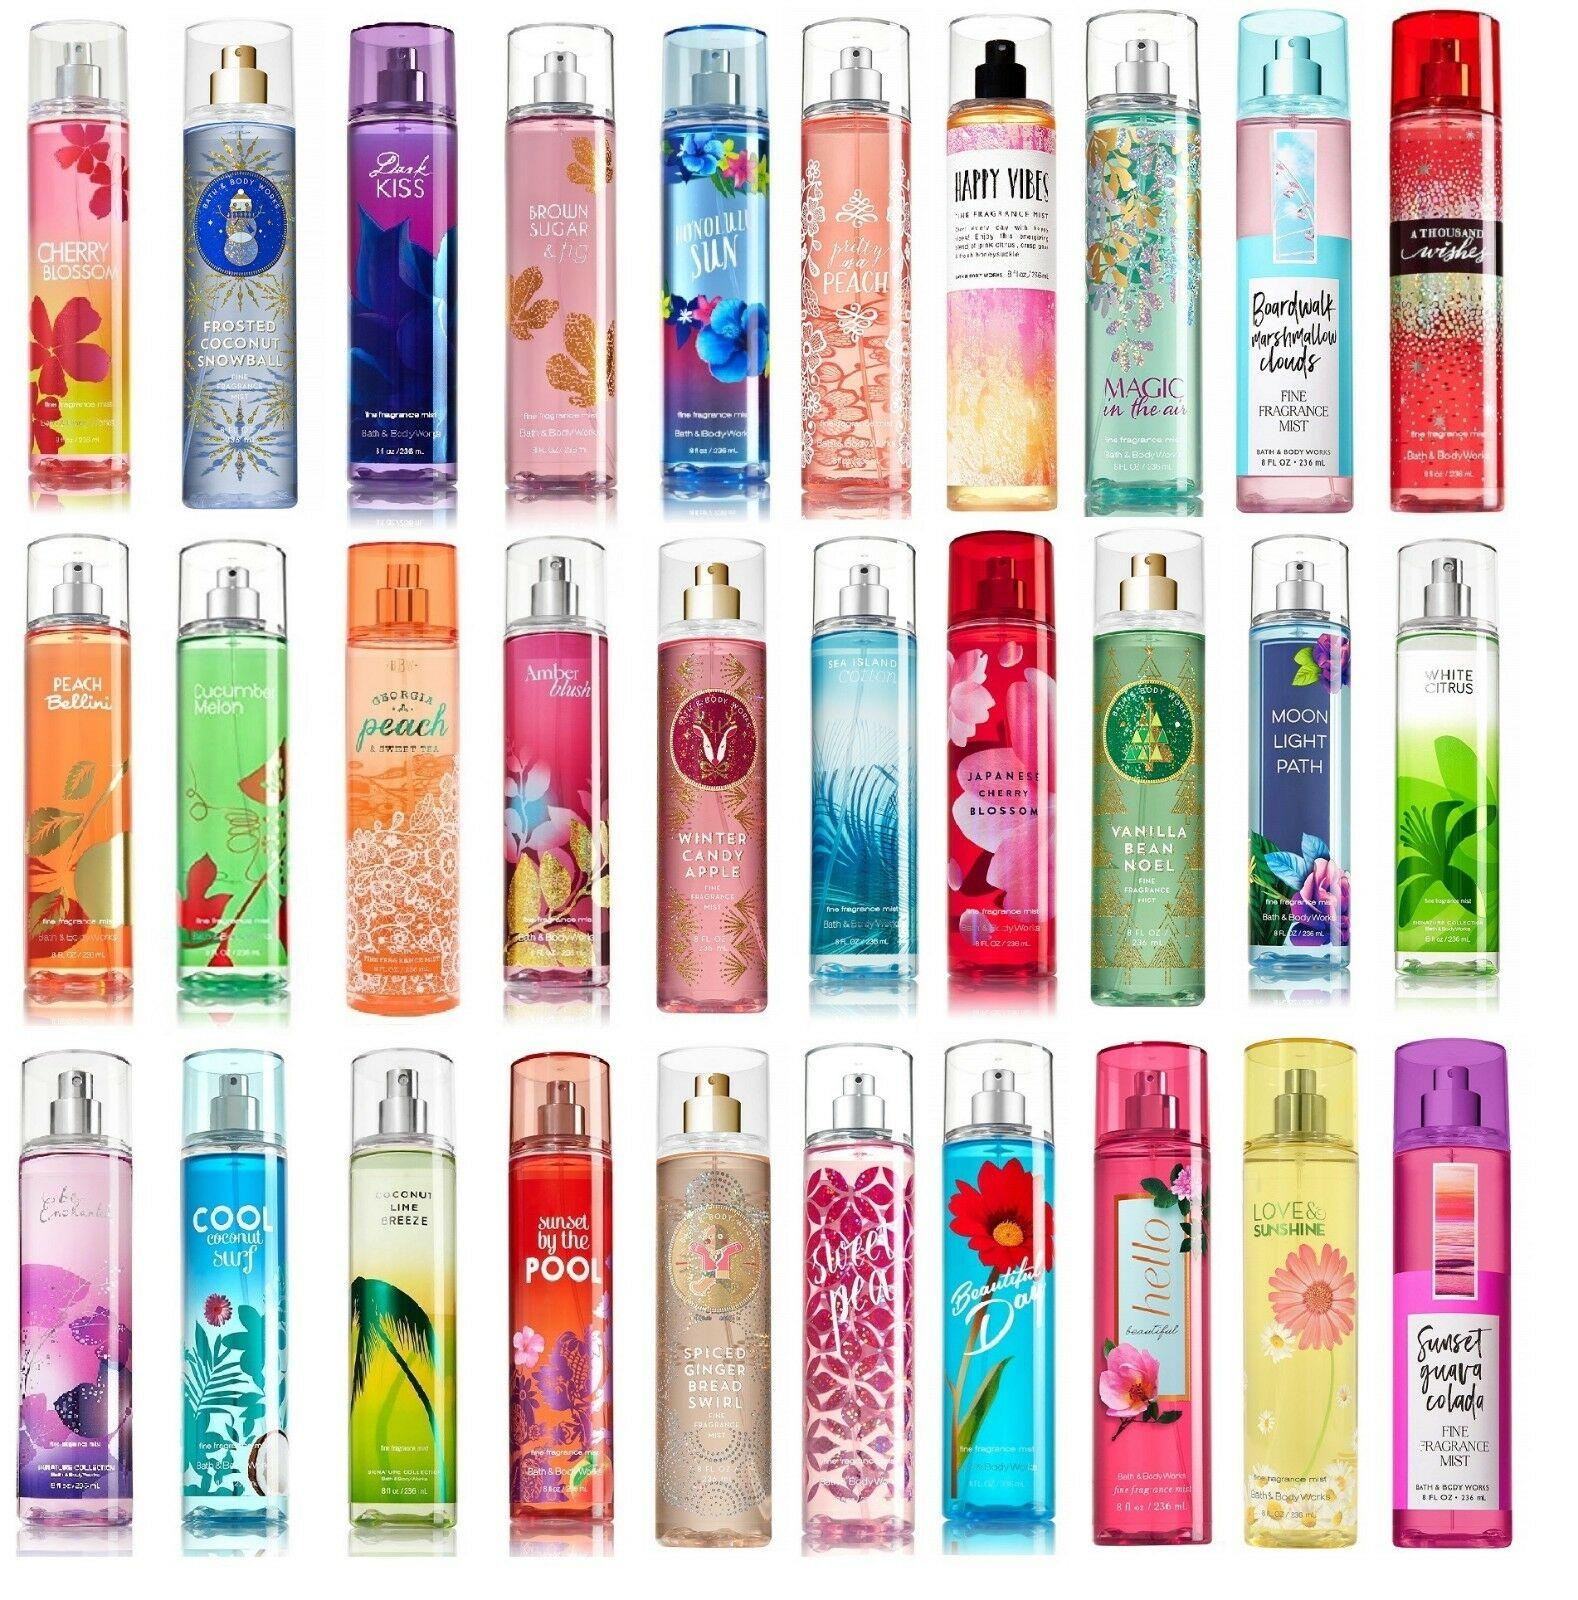 Bath and Body Works Fragrance Mist Spray ( 236 ml ) review and price